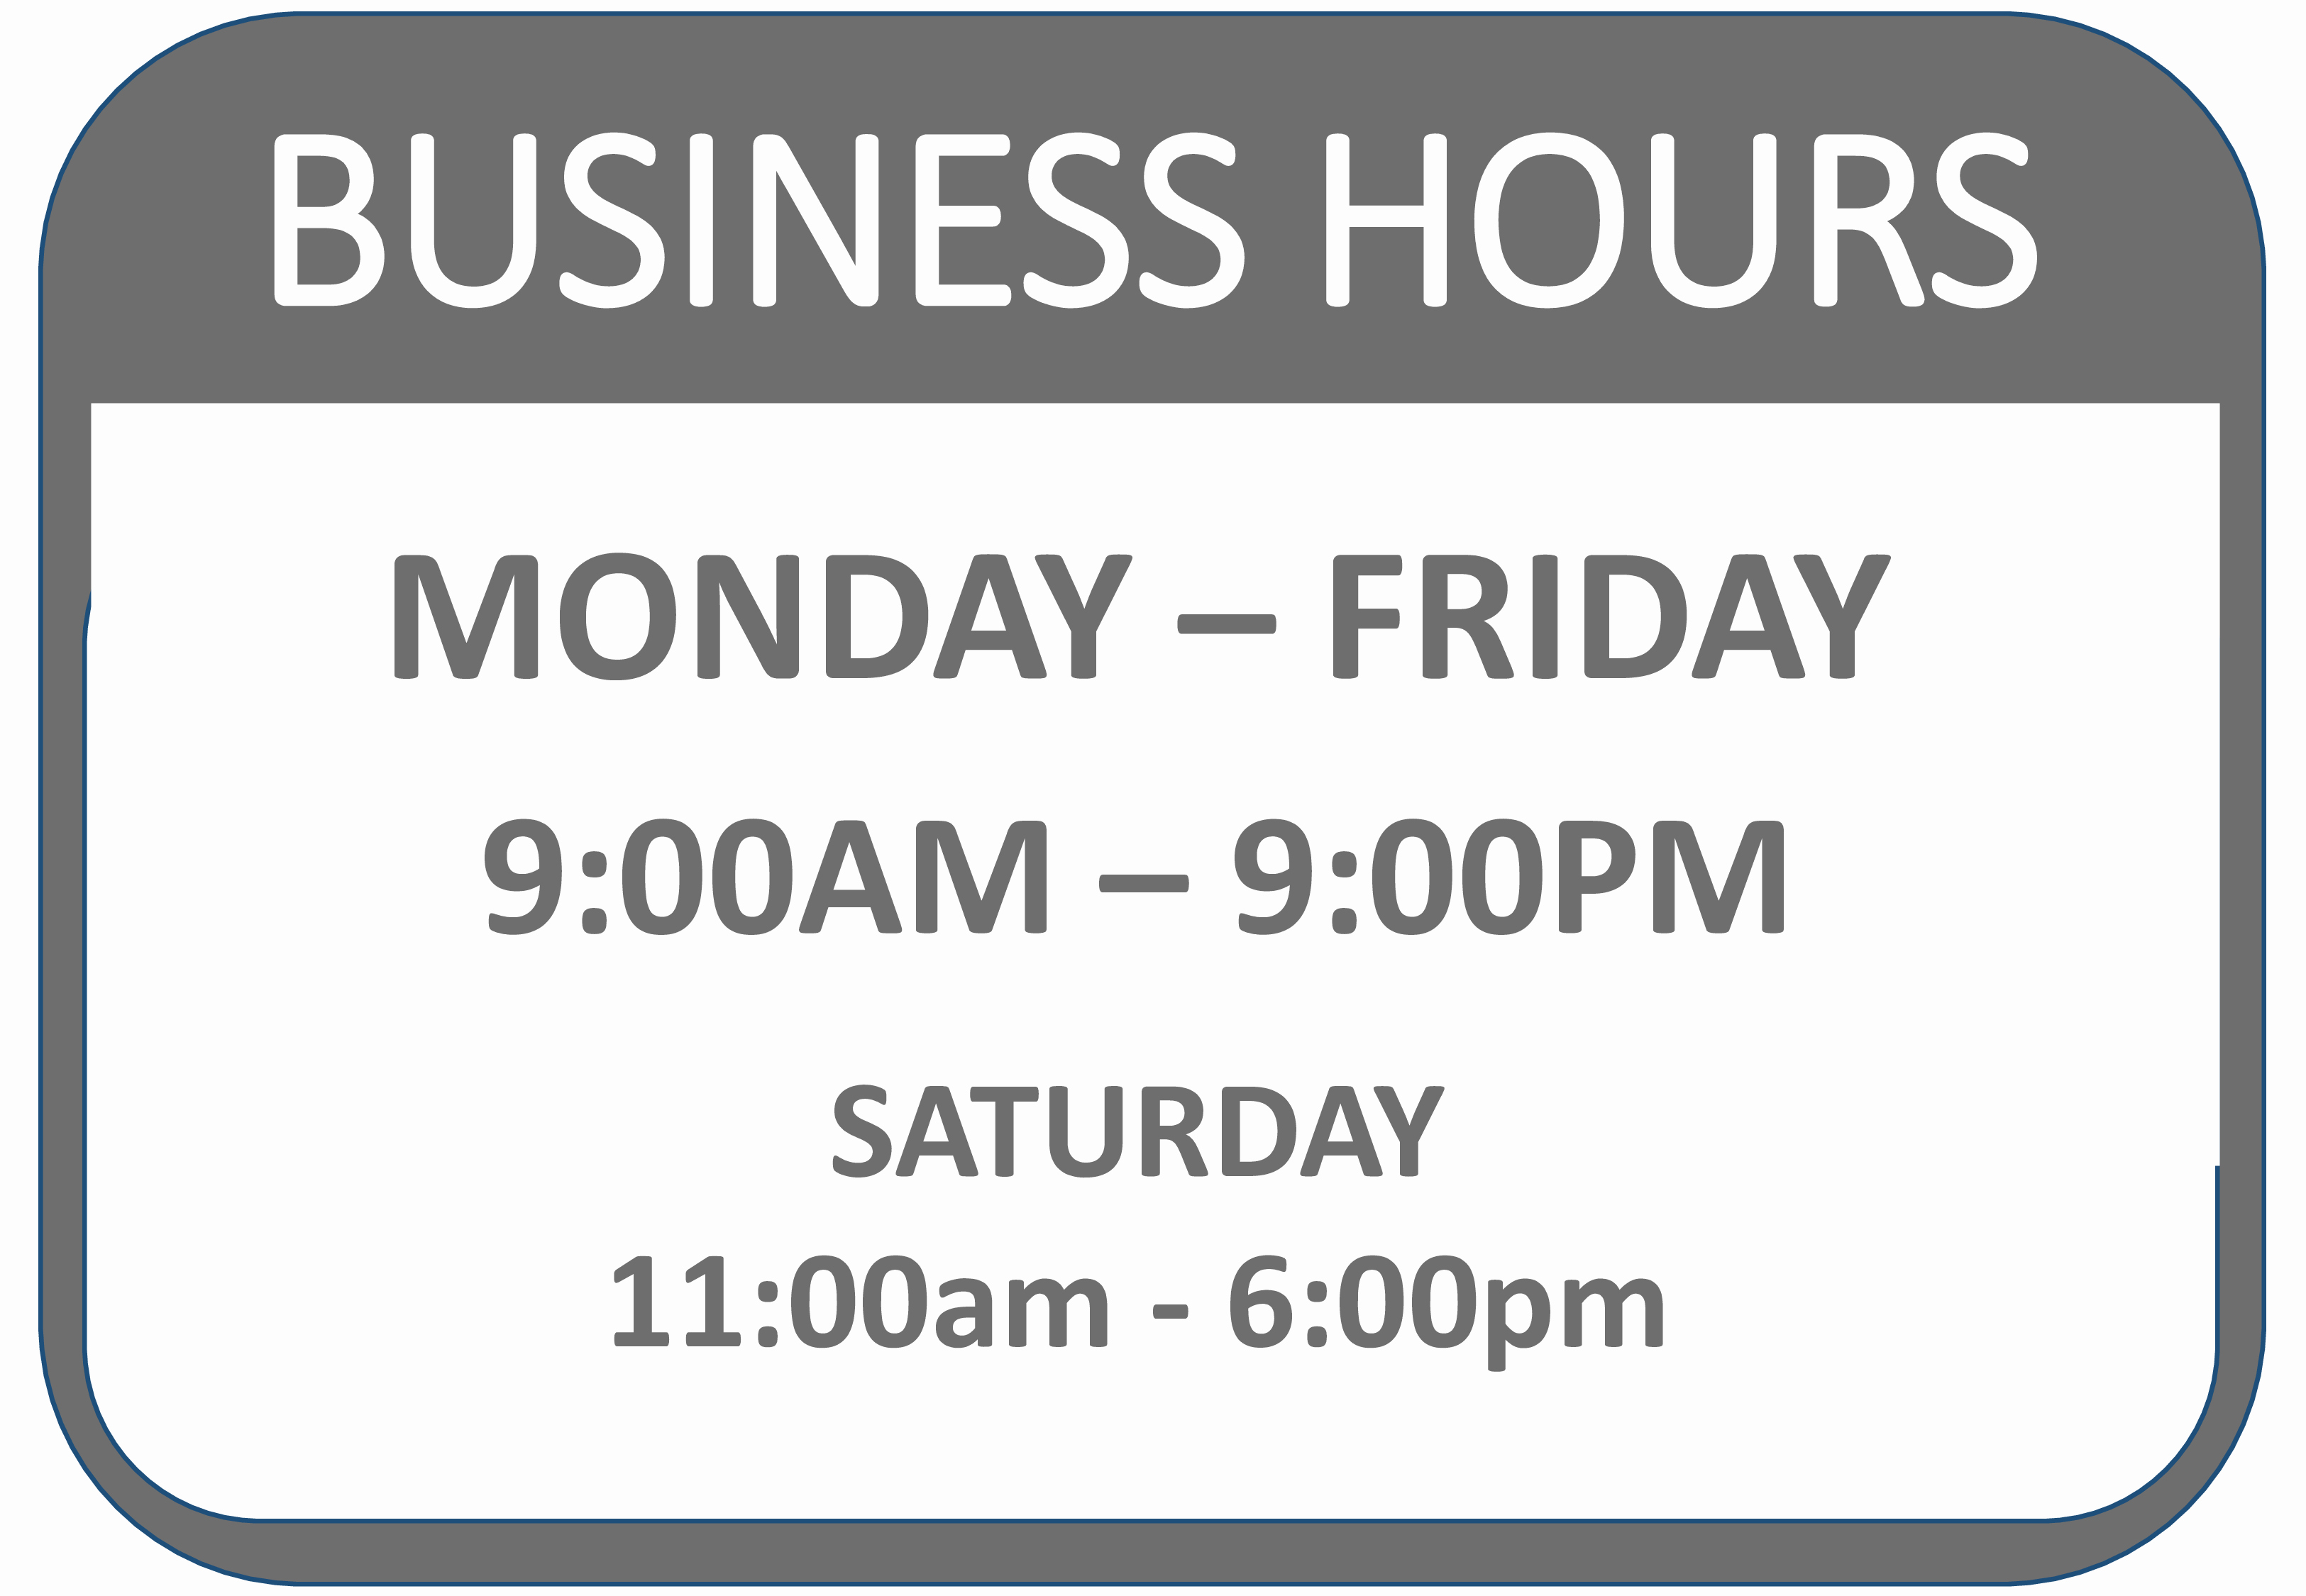 Store Hours Sign Template Awesome Free Business Hours Signage